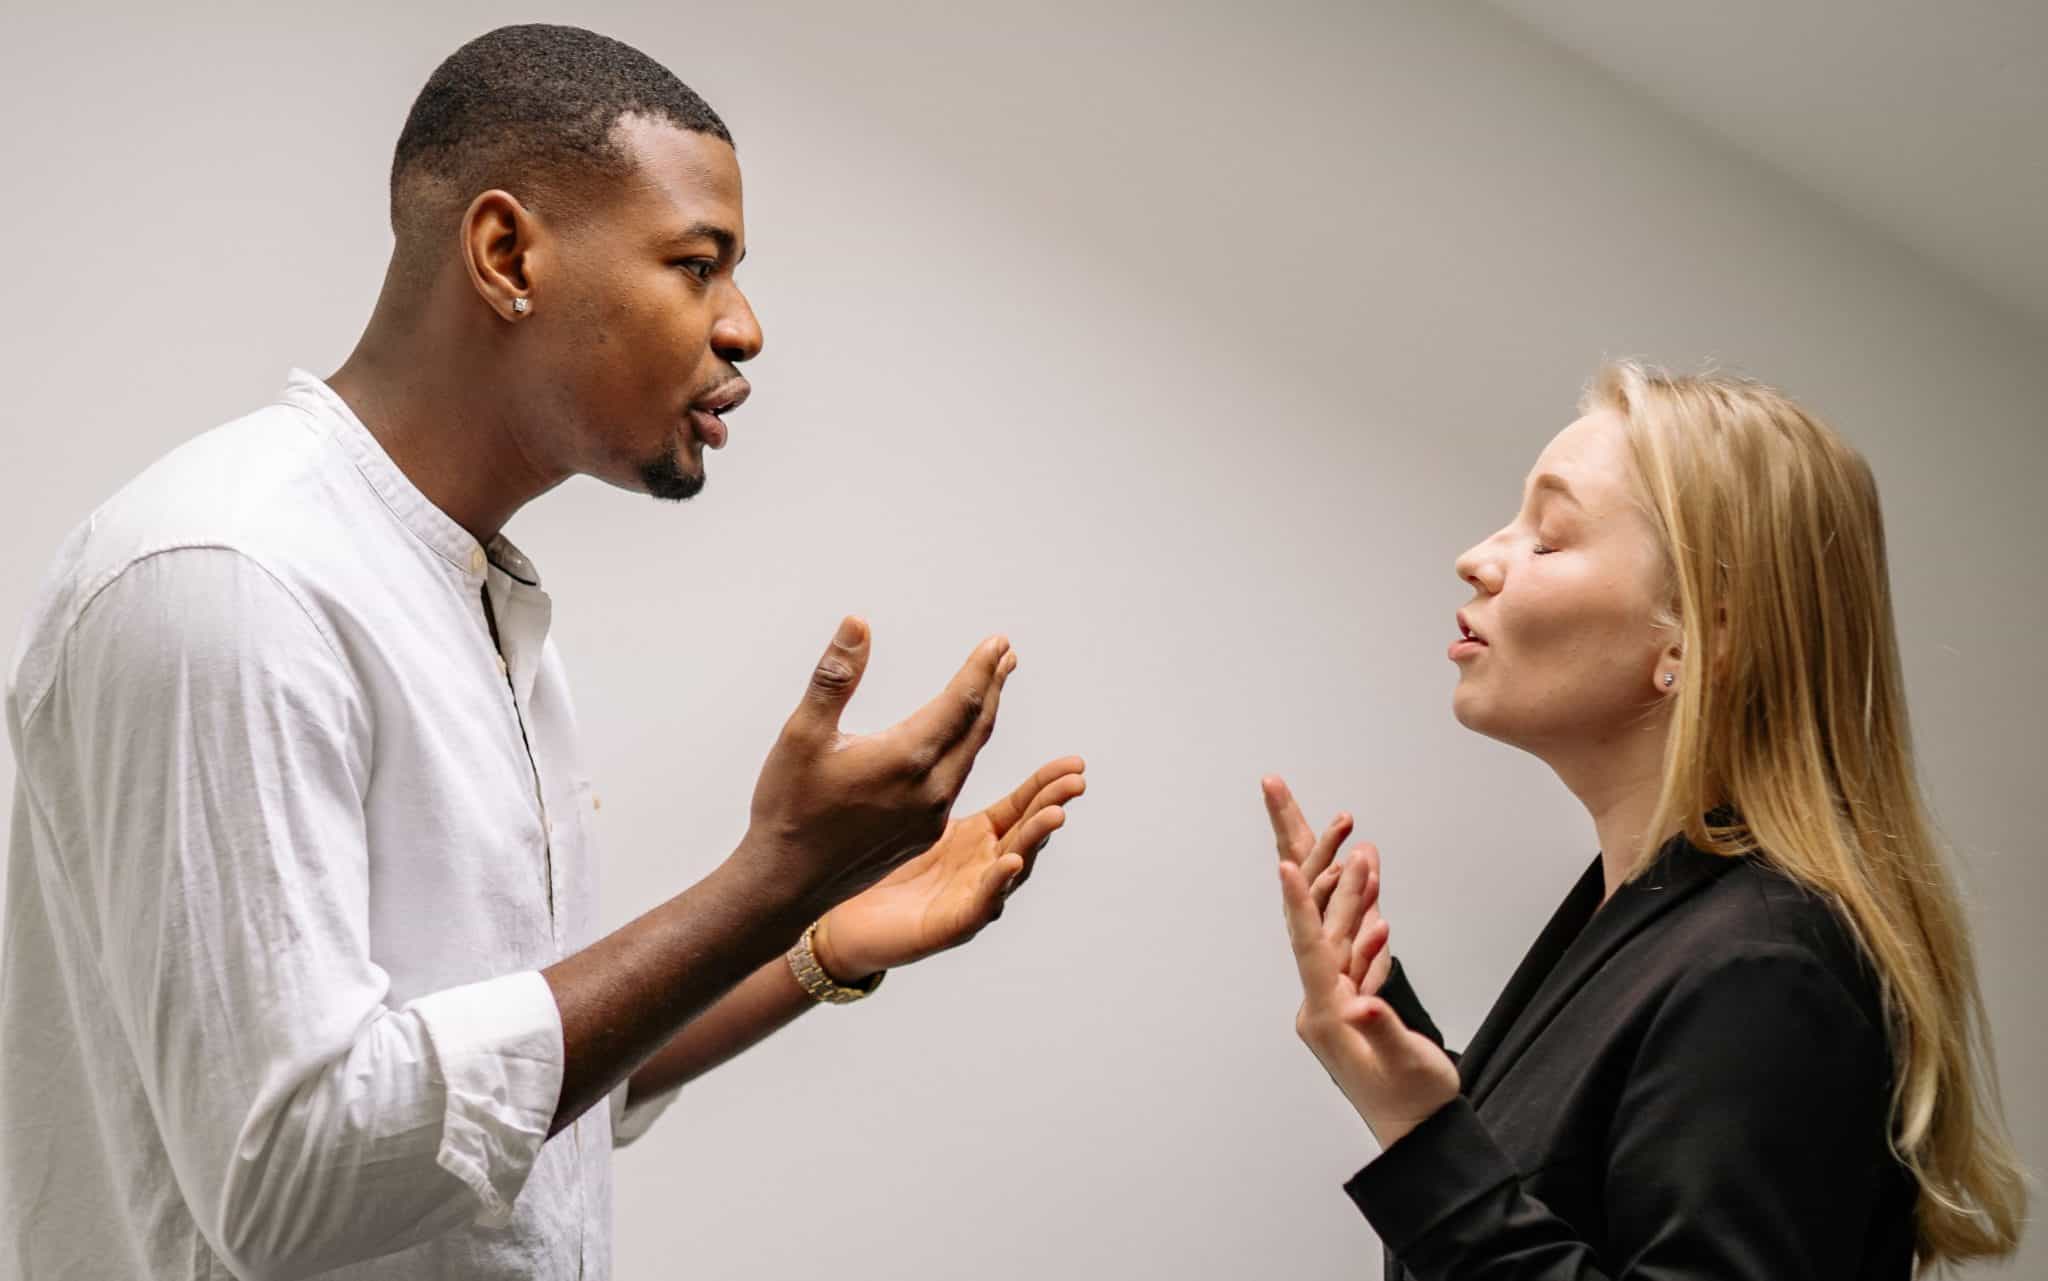 two people yelling at each other. This is an example of conflict in the workplace.